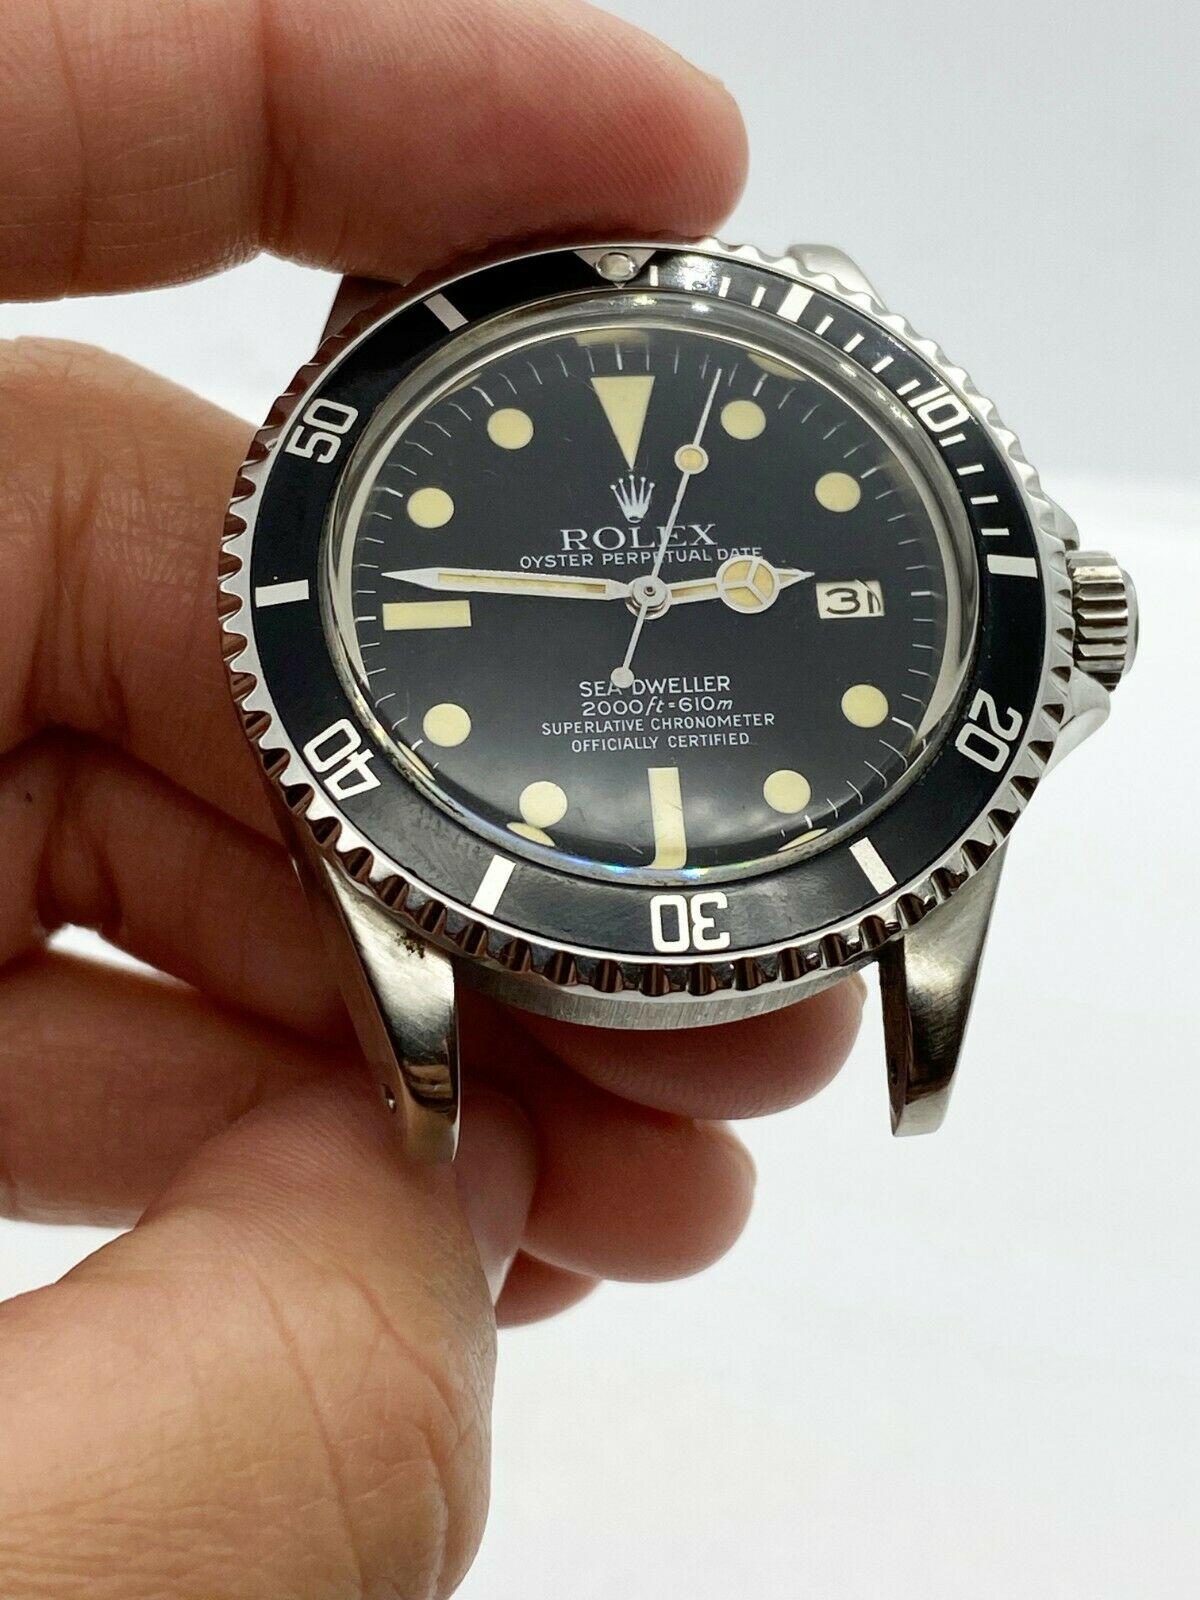 Style Number: 1665

Serial: 6752***

Year: 1981

Model: Sea Dweller

Case Material: Stainless Steel

Band: Stainless Steel

Bezel:  Stainless Steel

Dial: Black

Face: Acrylic

Case Size: 40mm

Includes: 
-Elegant Watch Box
-Certified Appraisal 
-1